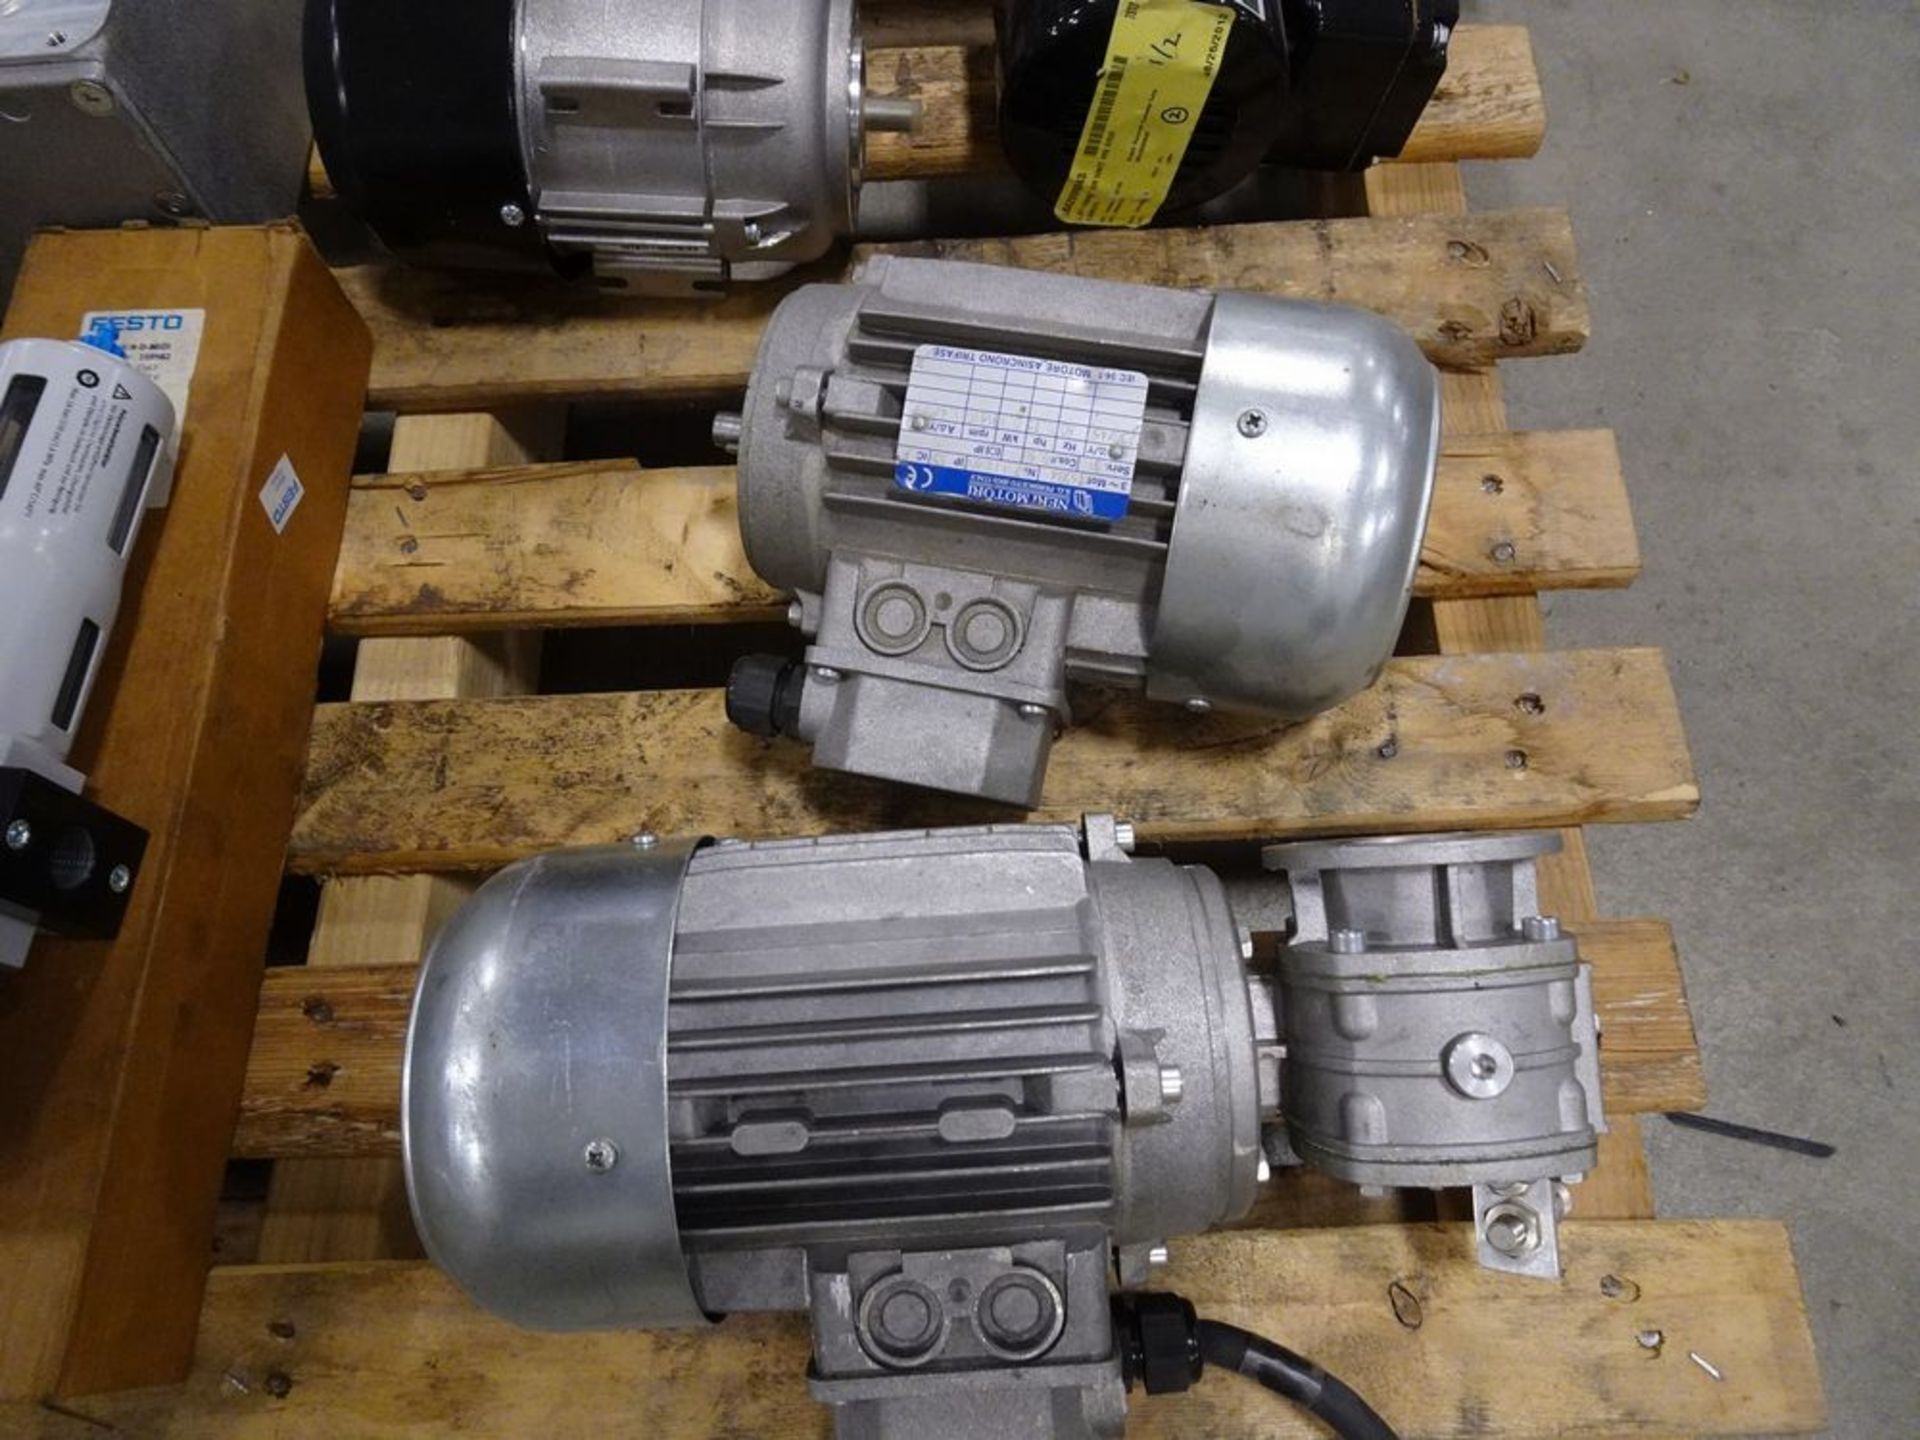 ASSORTED PRODUCT, FESTO VALVES, DRIVES, MOTORS, GEARBOXES, ETC. - Image 2 of 5